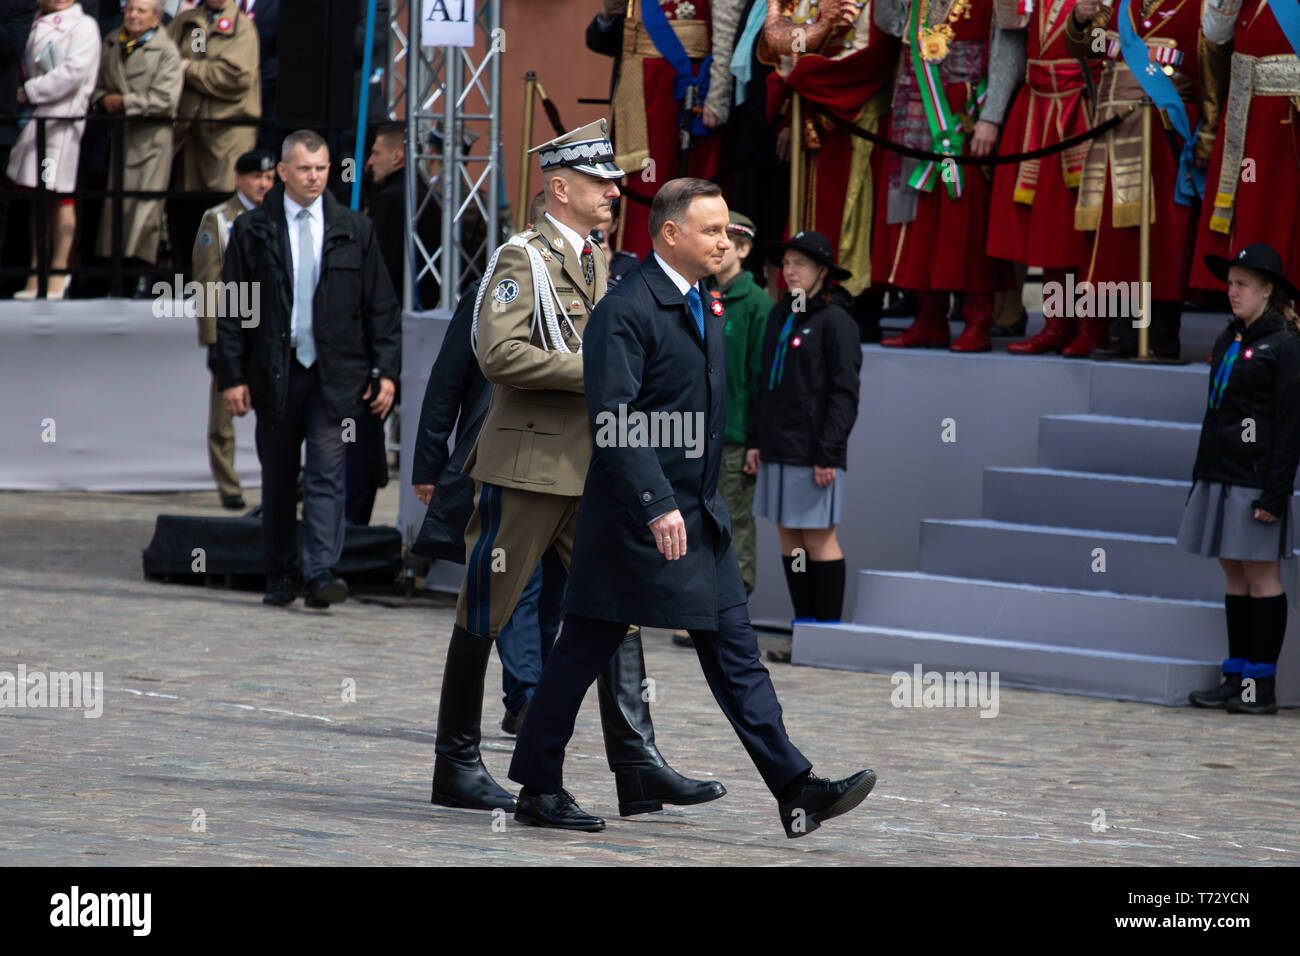 Polish President Andrzej Duda seen marching accompanied by a soldier during the occasion. Celebration of the Constitution Day, May 3 at the Castle Square. Ceremonial military parade on the occasion of the celebration. Stock Photo